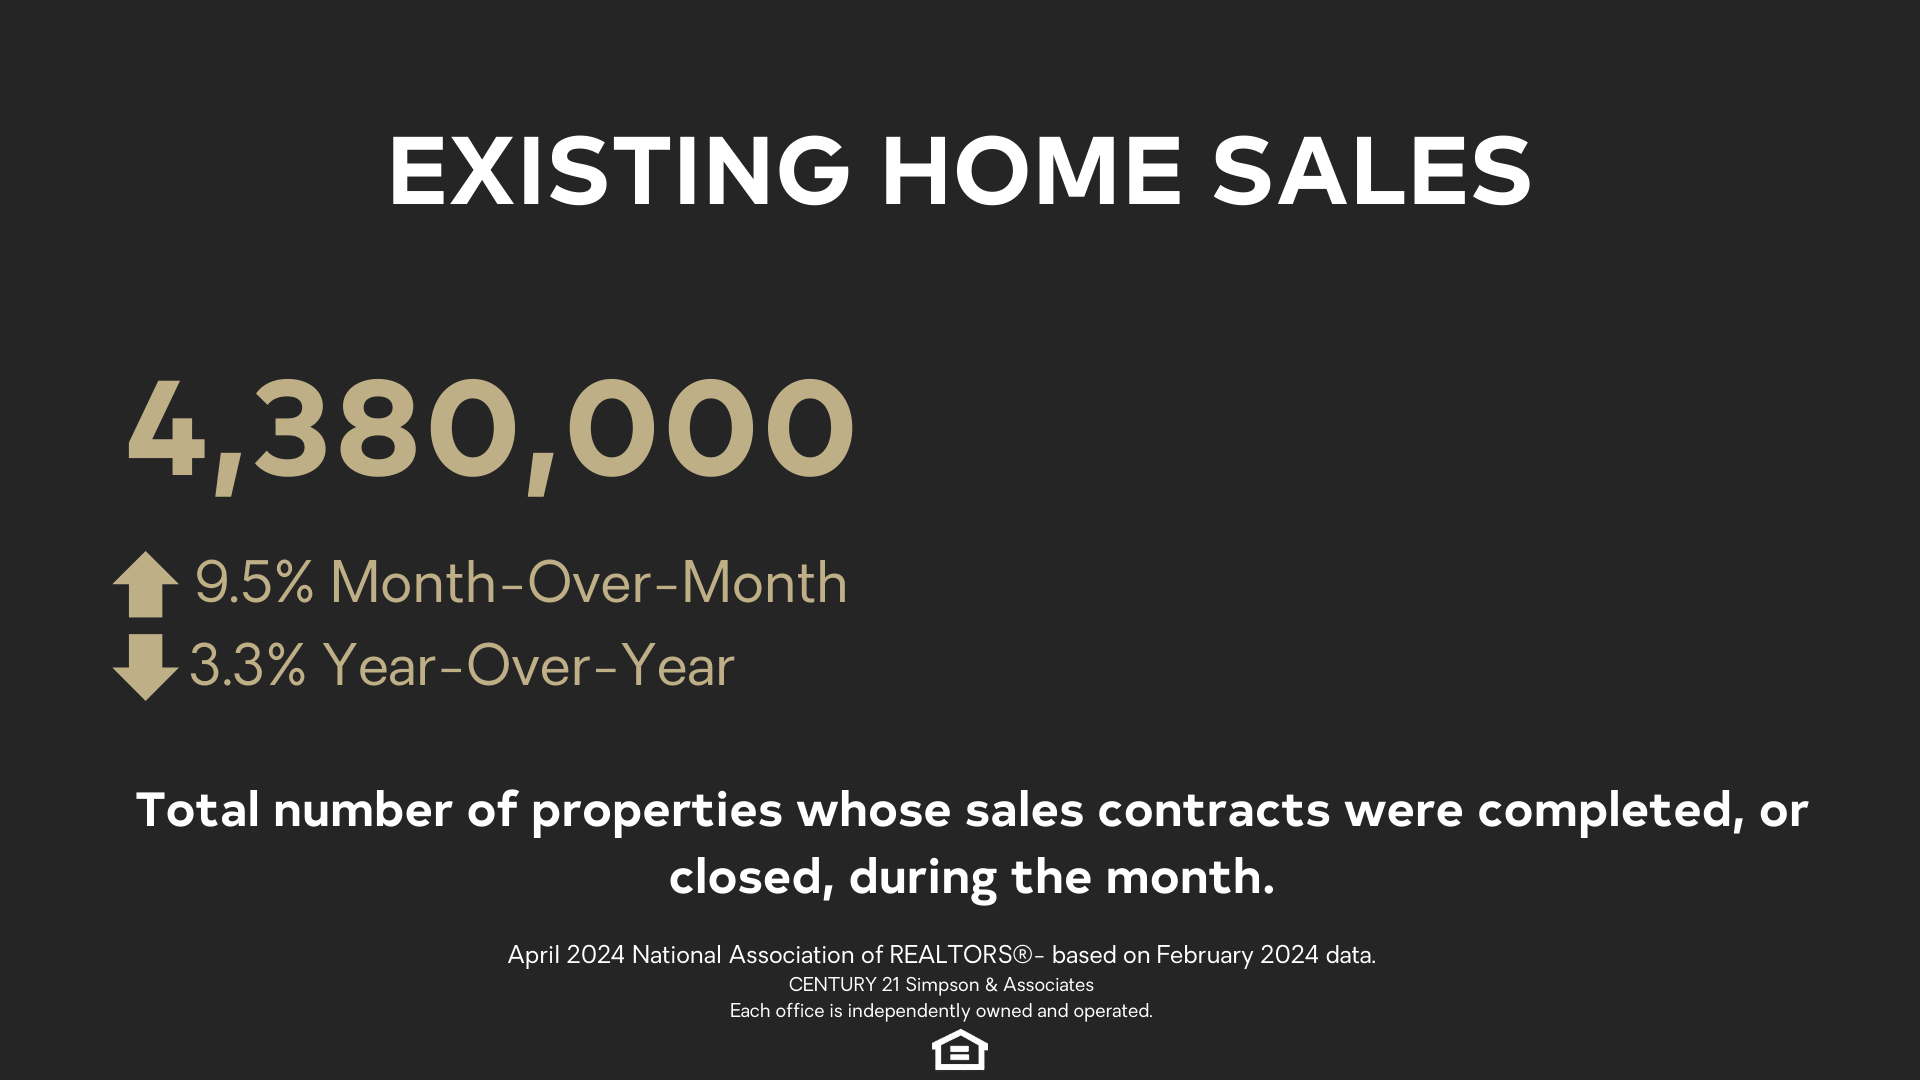 Apr '24 Existing Home Sales